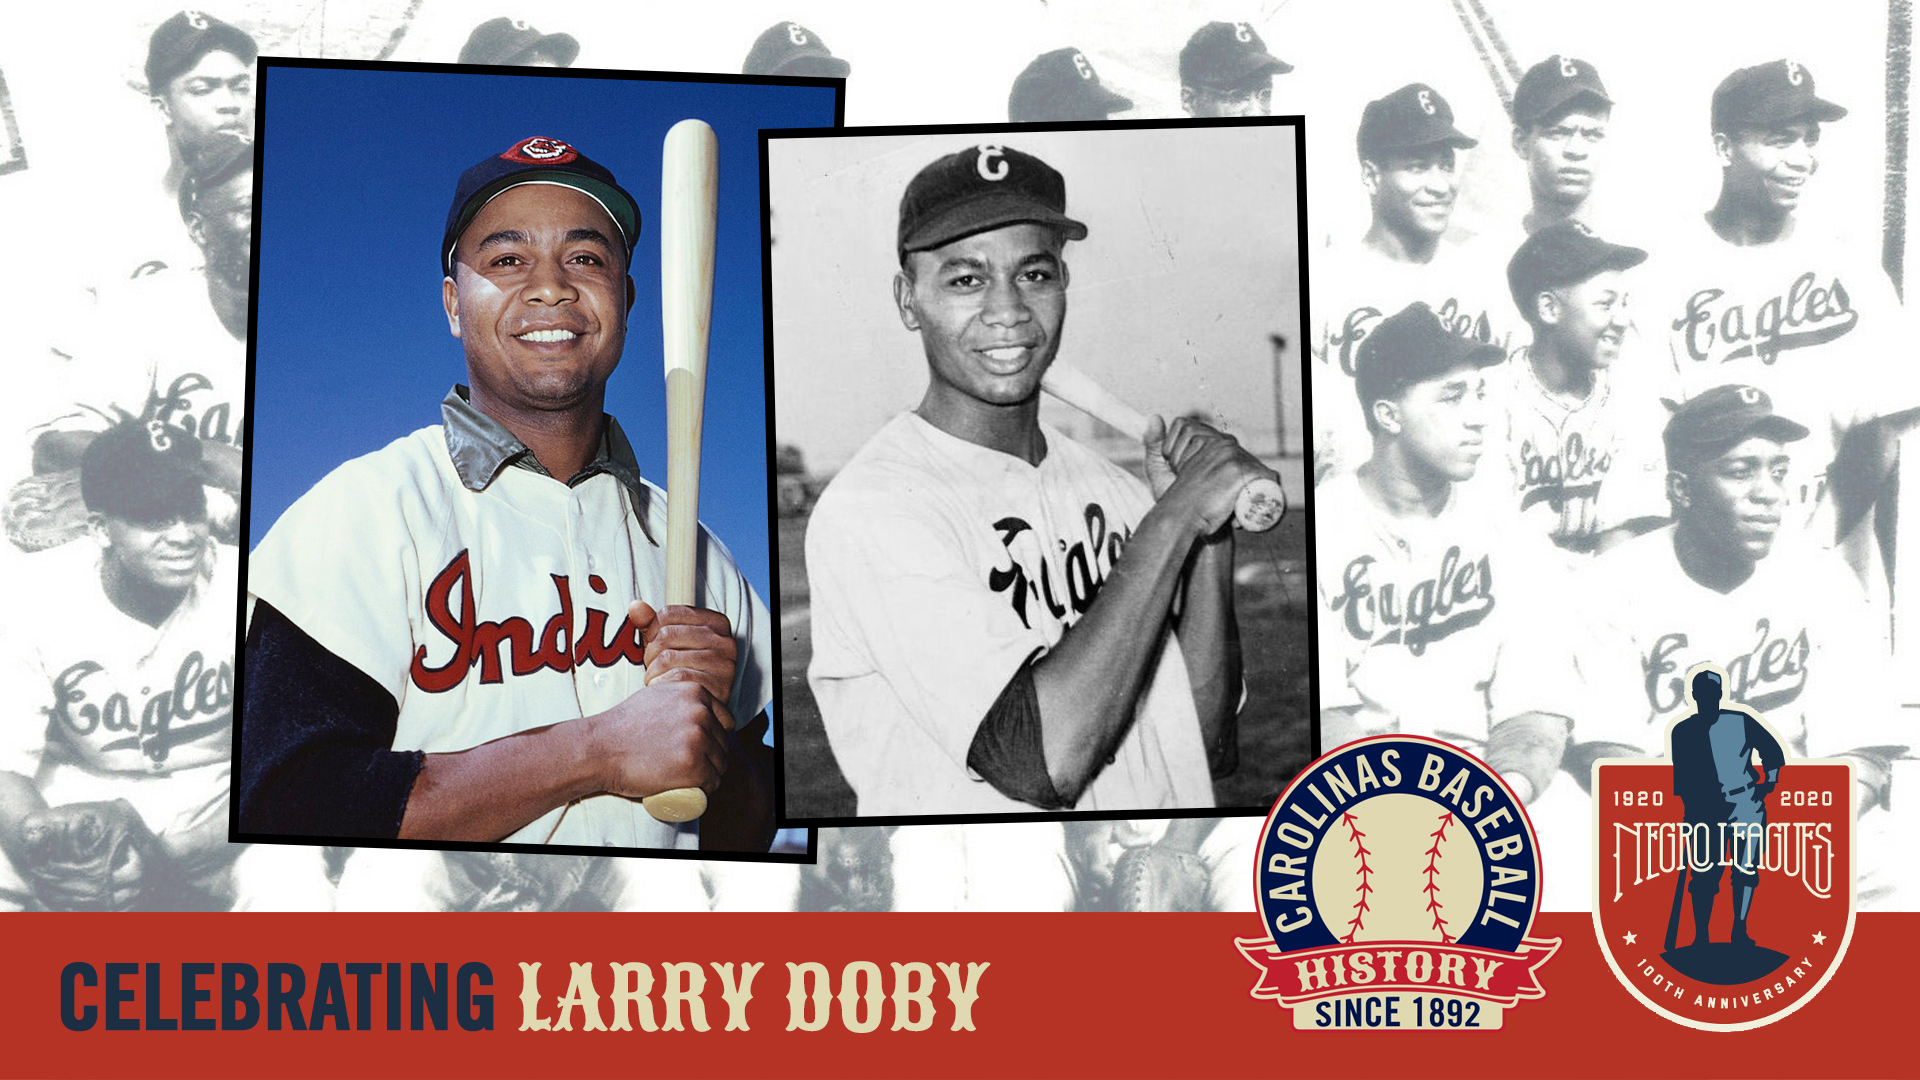 Larry Doby (Baseball Hall of Fame Outfielder) - On This Day